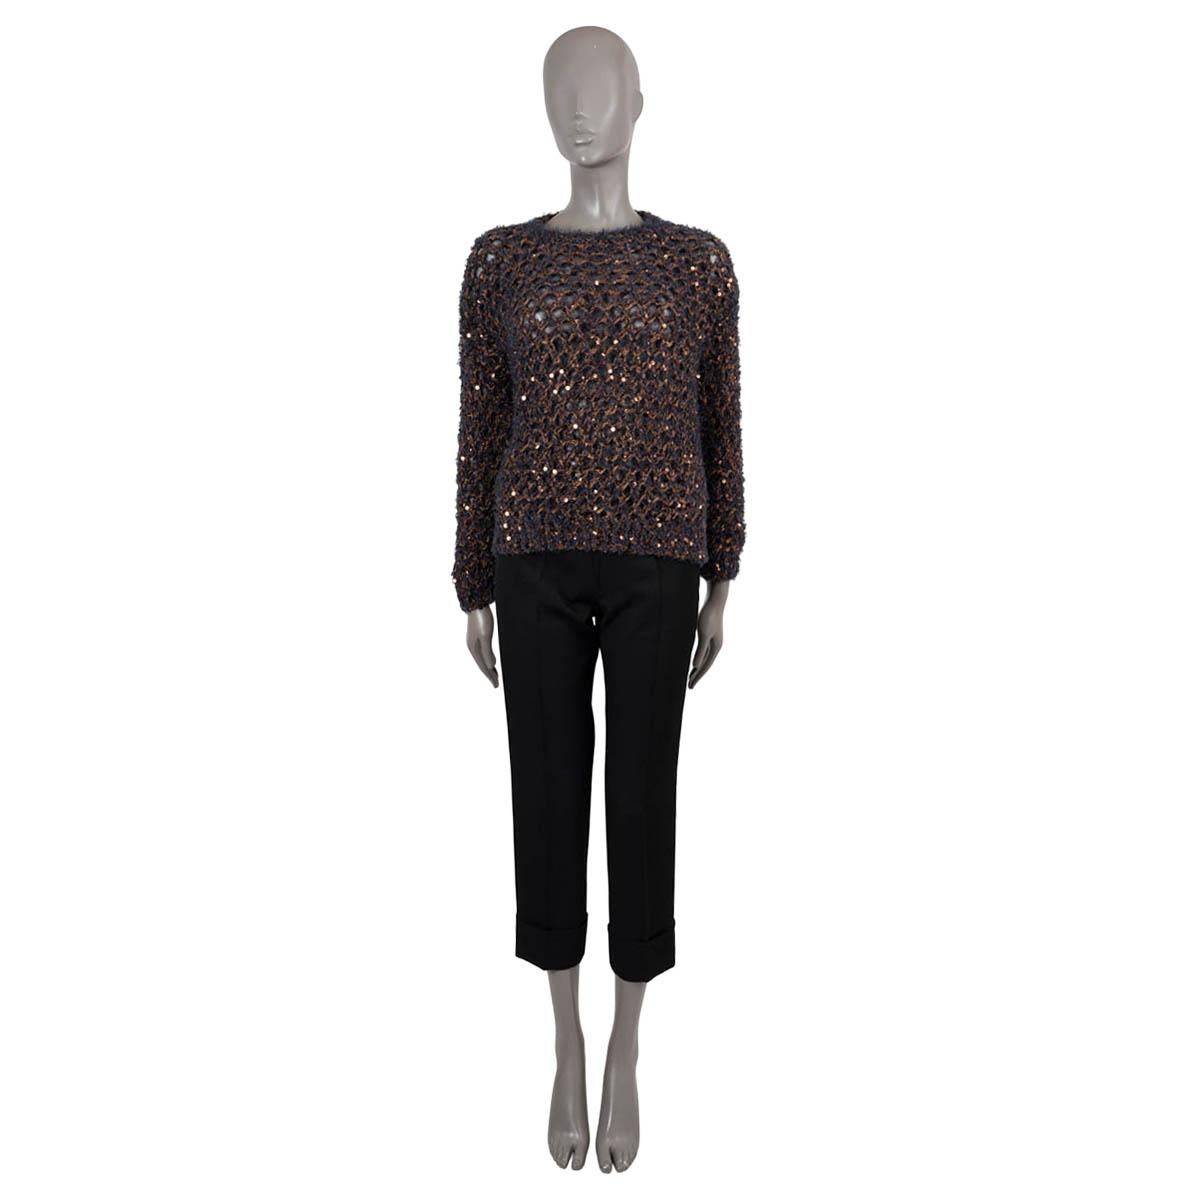 100% authentic Brunello Cucinelli net sweater in ink blue and bronze diamond yarn cotton (43%), polyurethane (20%), polyester (17%), polyamide (12%), acrylic (4%) and wool (4%). Features a chunky open knit with bronze sequins through out, a crewneck